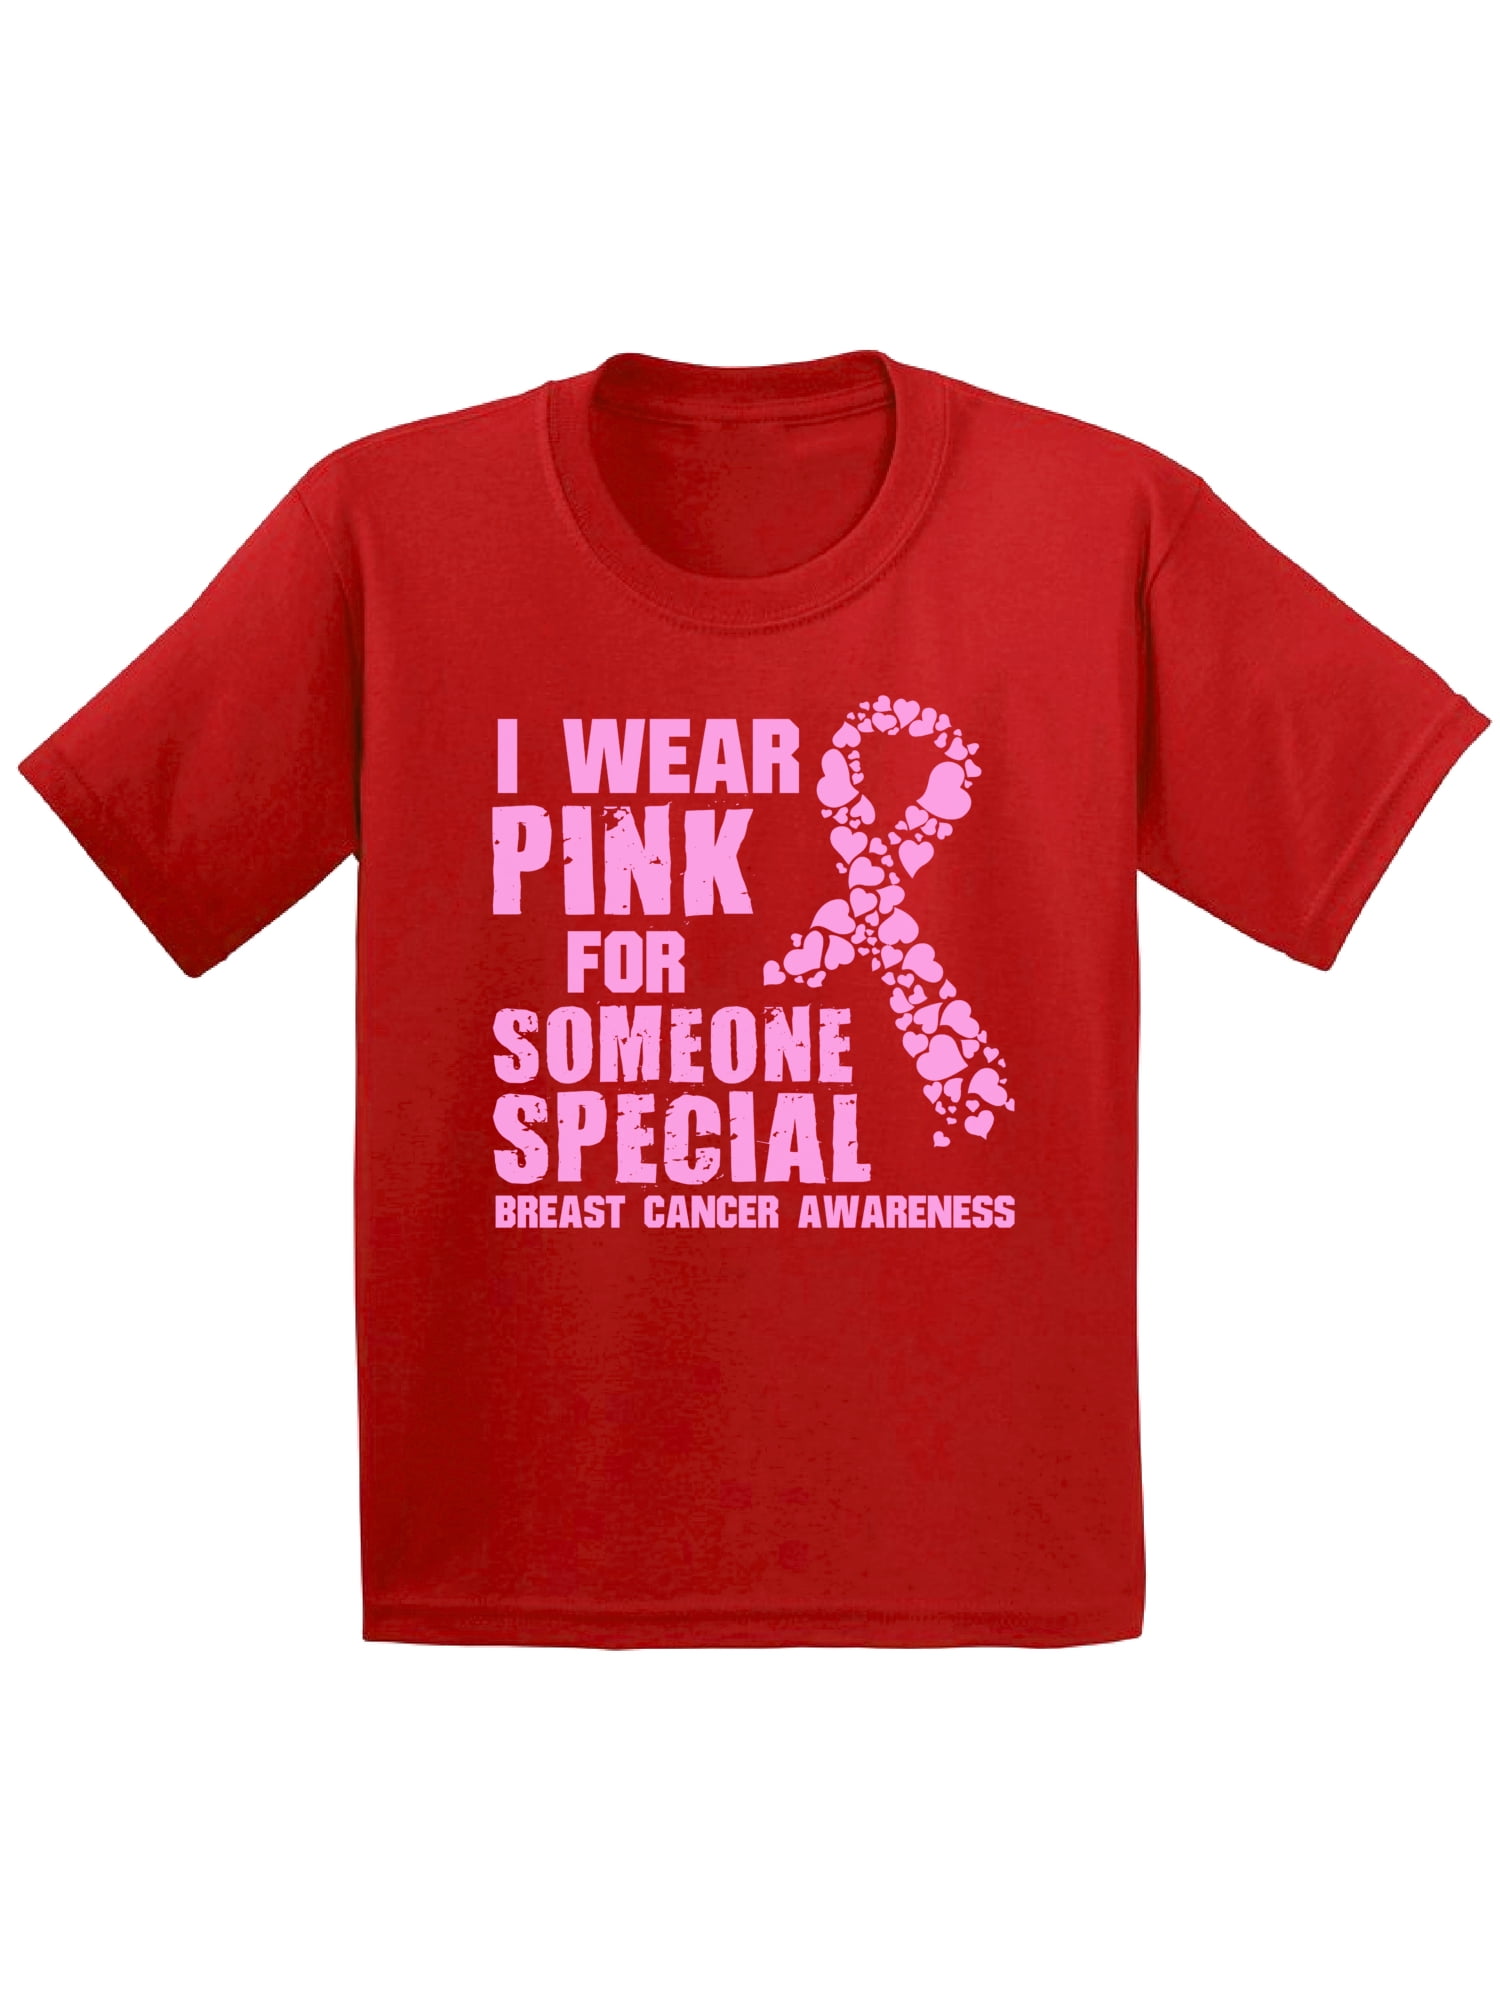 I Wear Pink For Someone Special Shirt Breast Cancer Awareness Shirts for Kids 